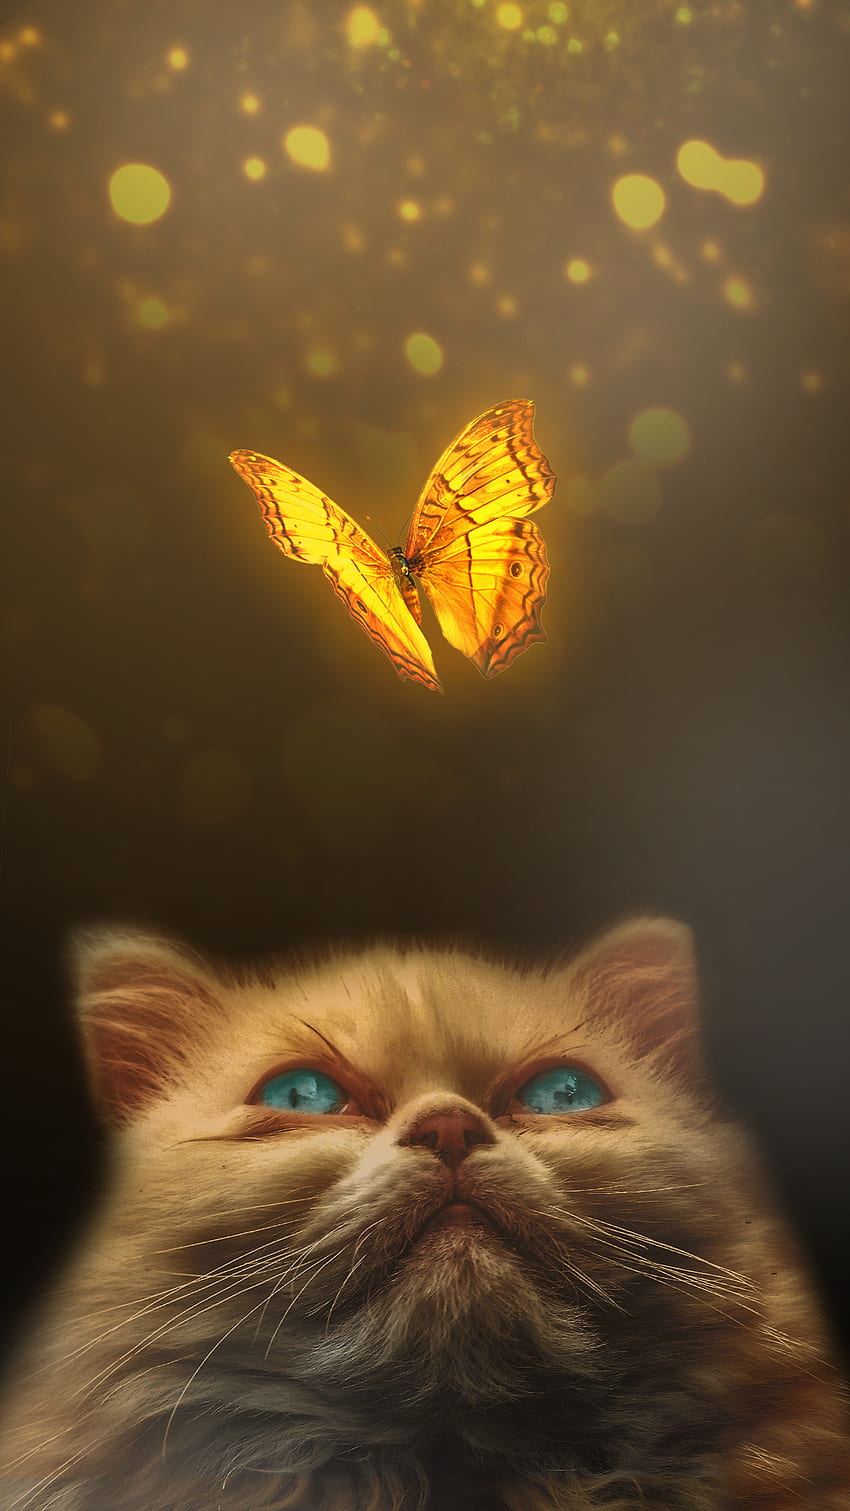 1080P Free download | Cat with butterfly gld, moths_and_butterflies ...